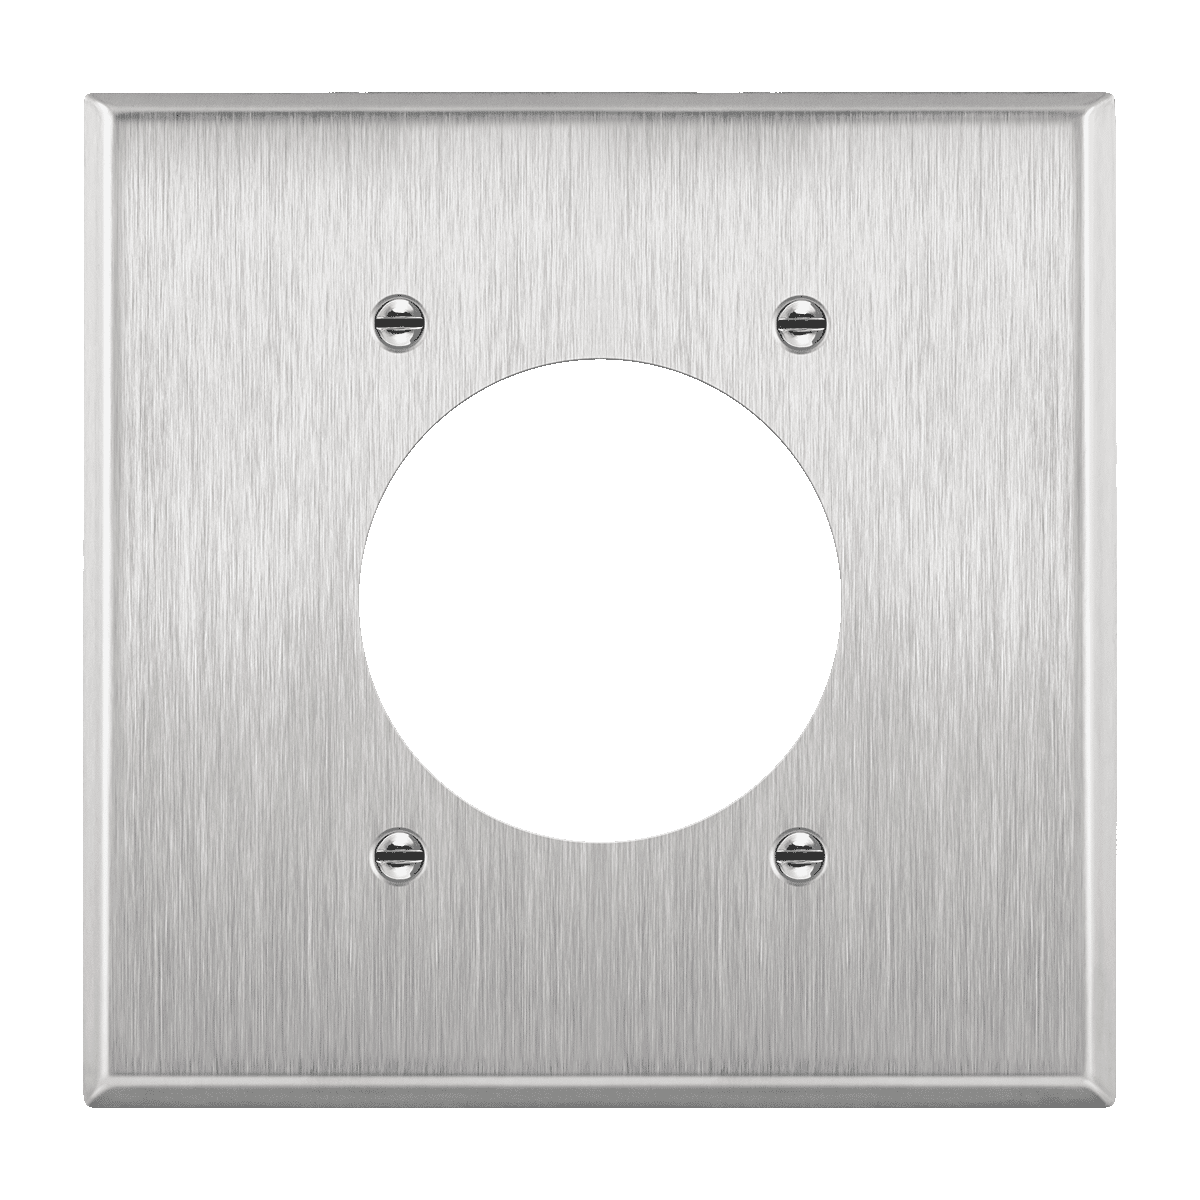 2-Gang Stainless Steel 2.125" Hole Receptacle Wall Plate 7792